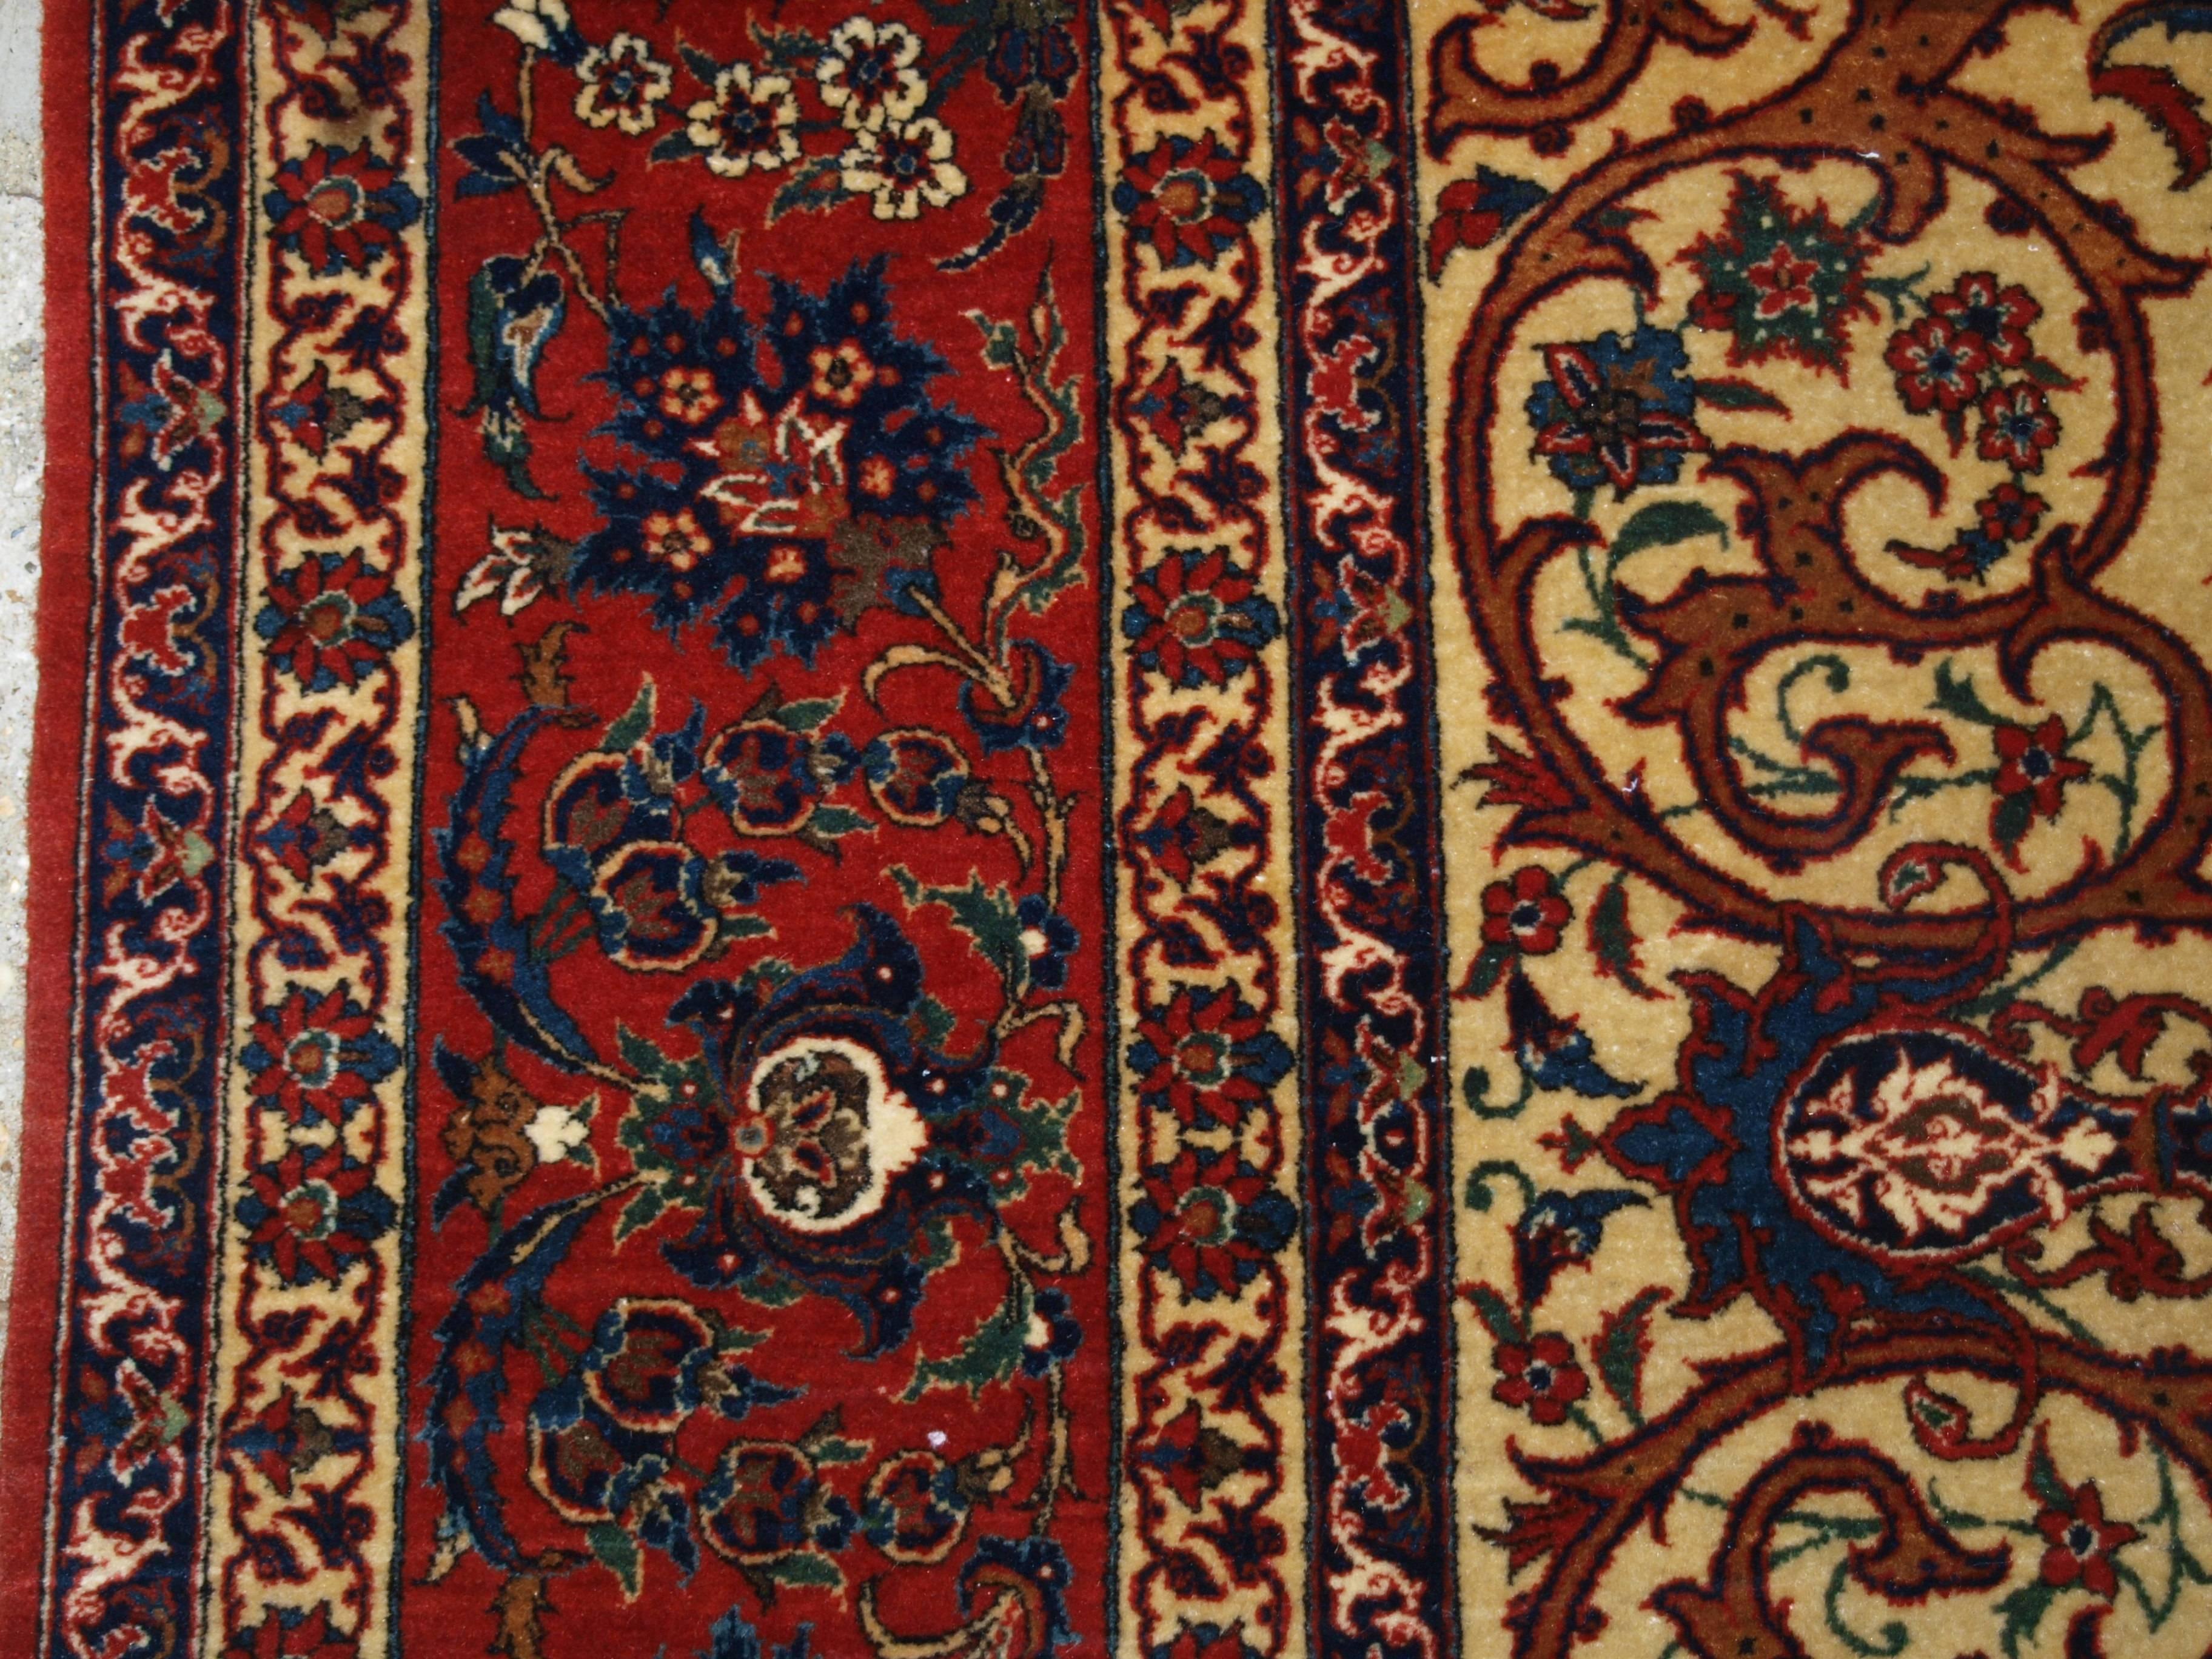 20th Century Old Persian Isfahan Carpet, of Superb Classic Design, Outstanding Color For Sale